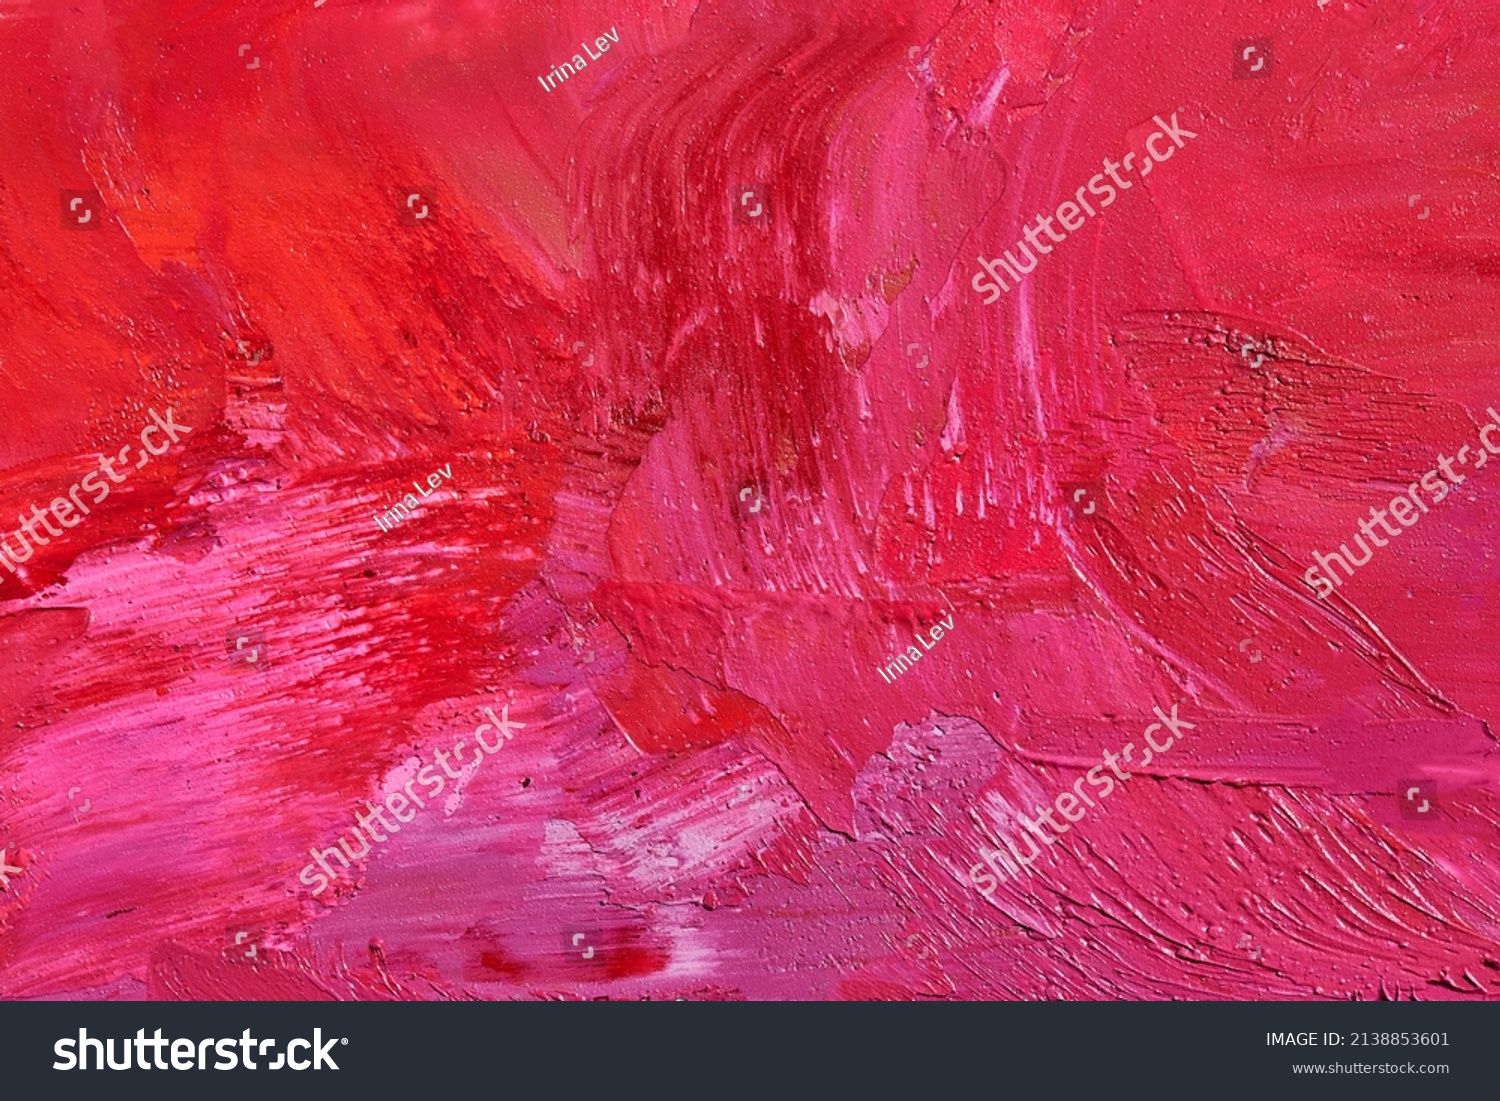 Oil texture imitation - pink, orange, red and teal background #2138853601